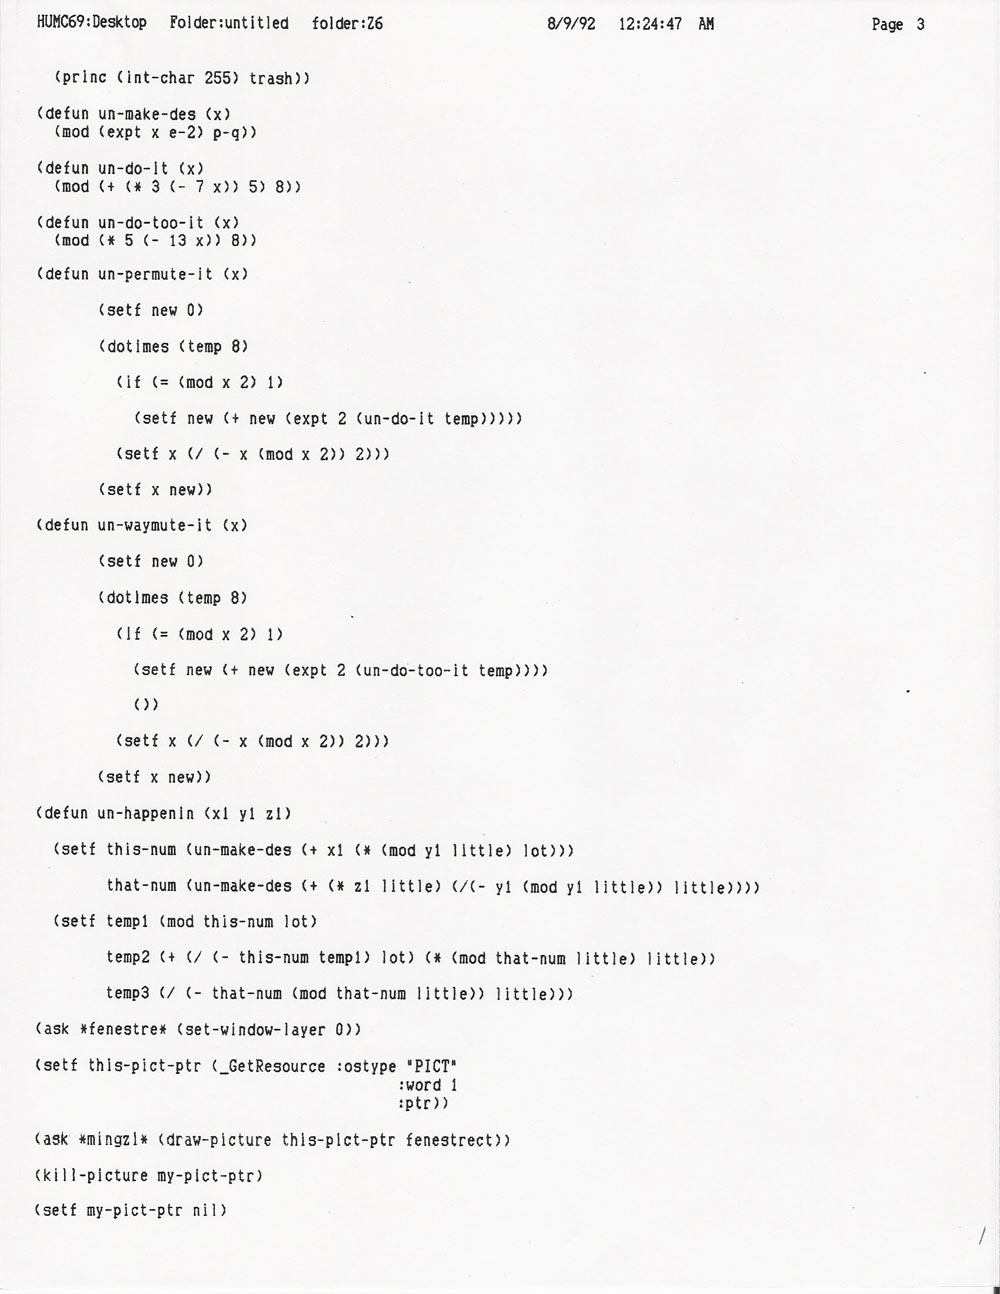 Agrippa prototype code, page 3